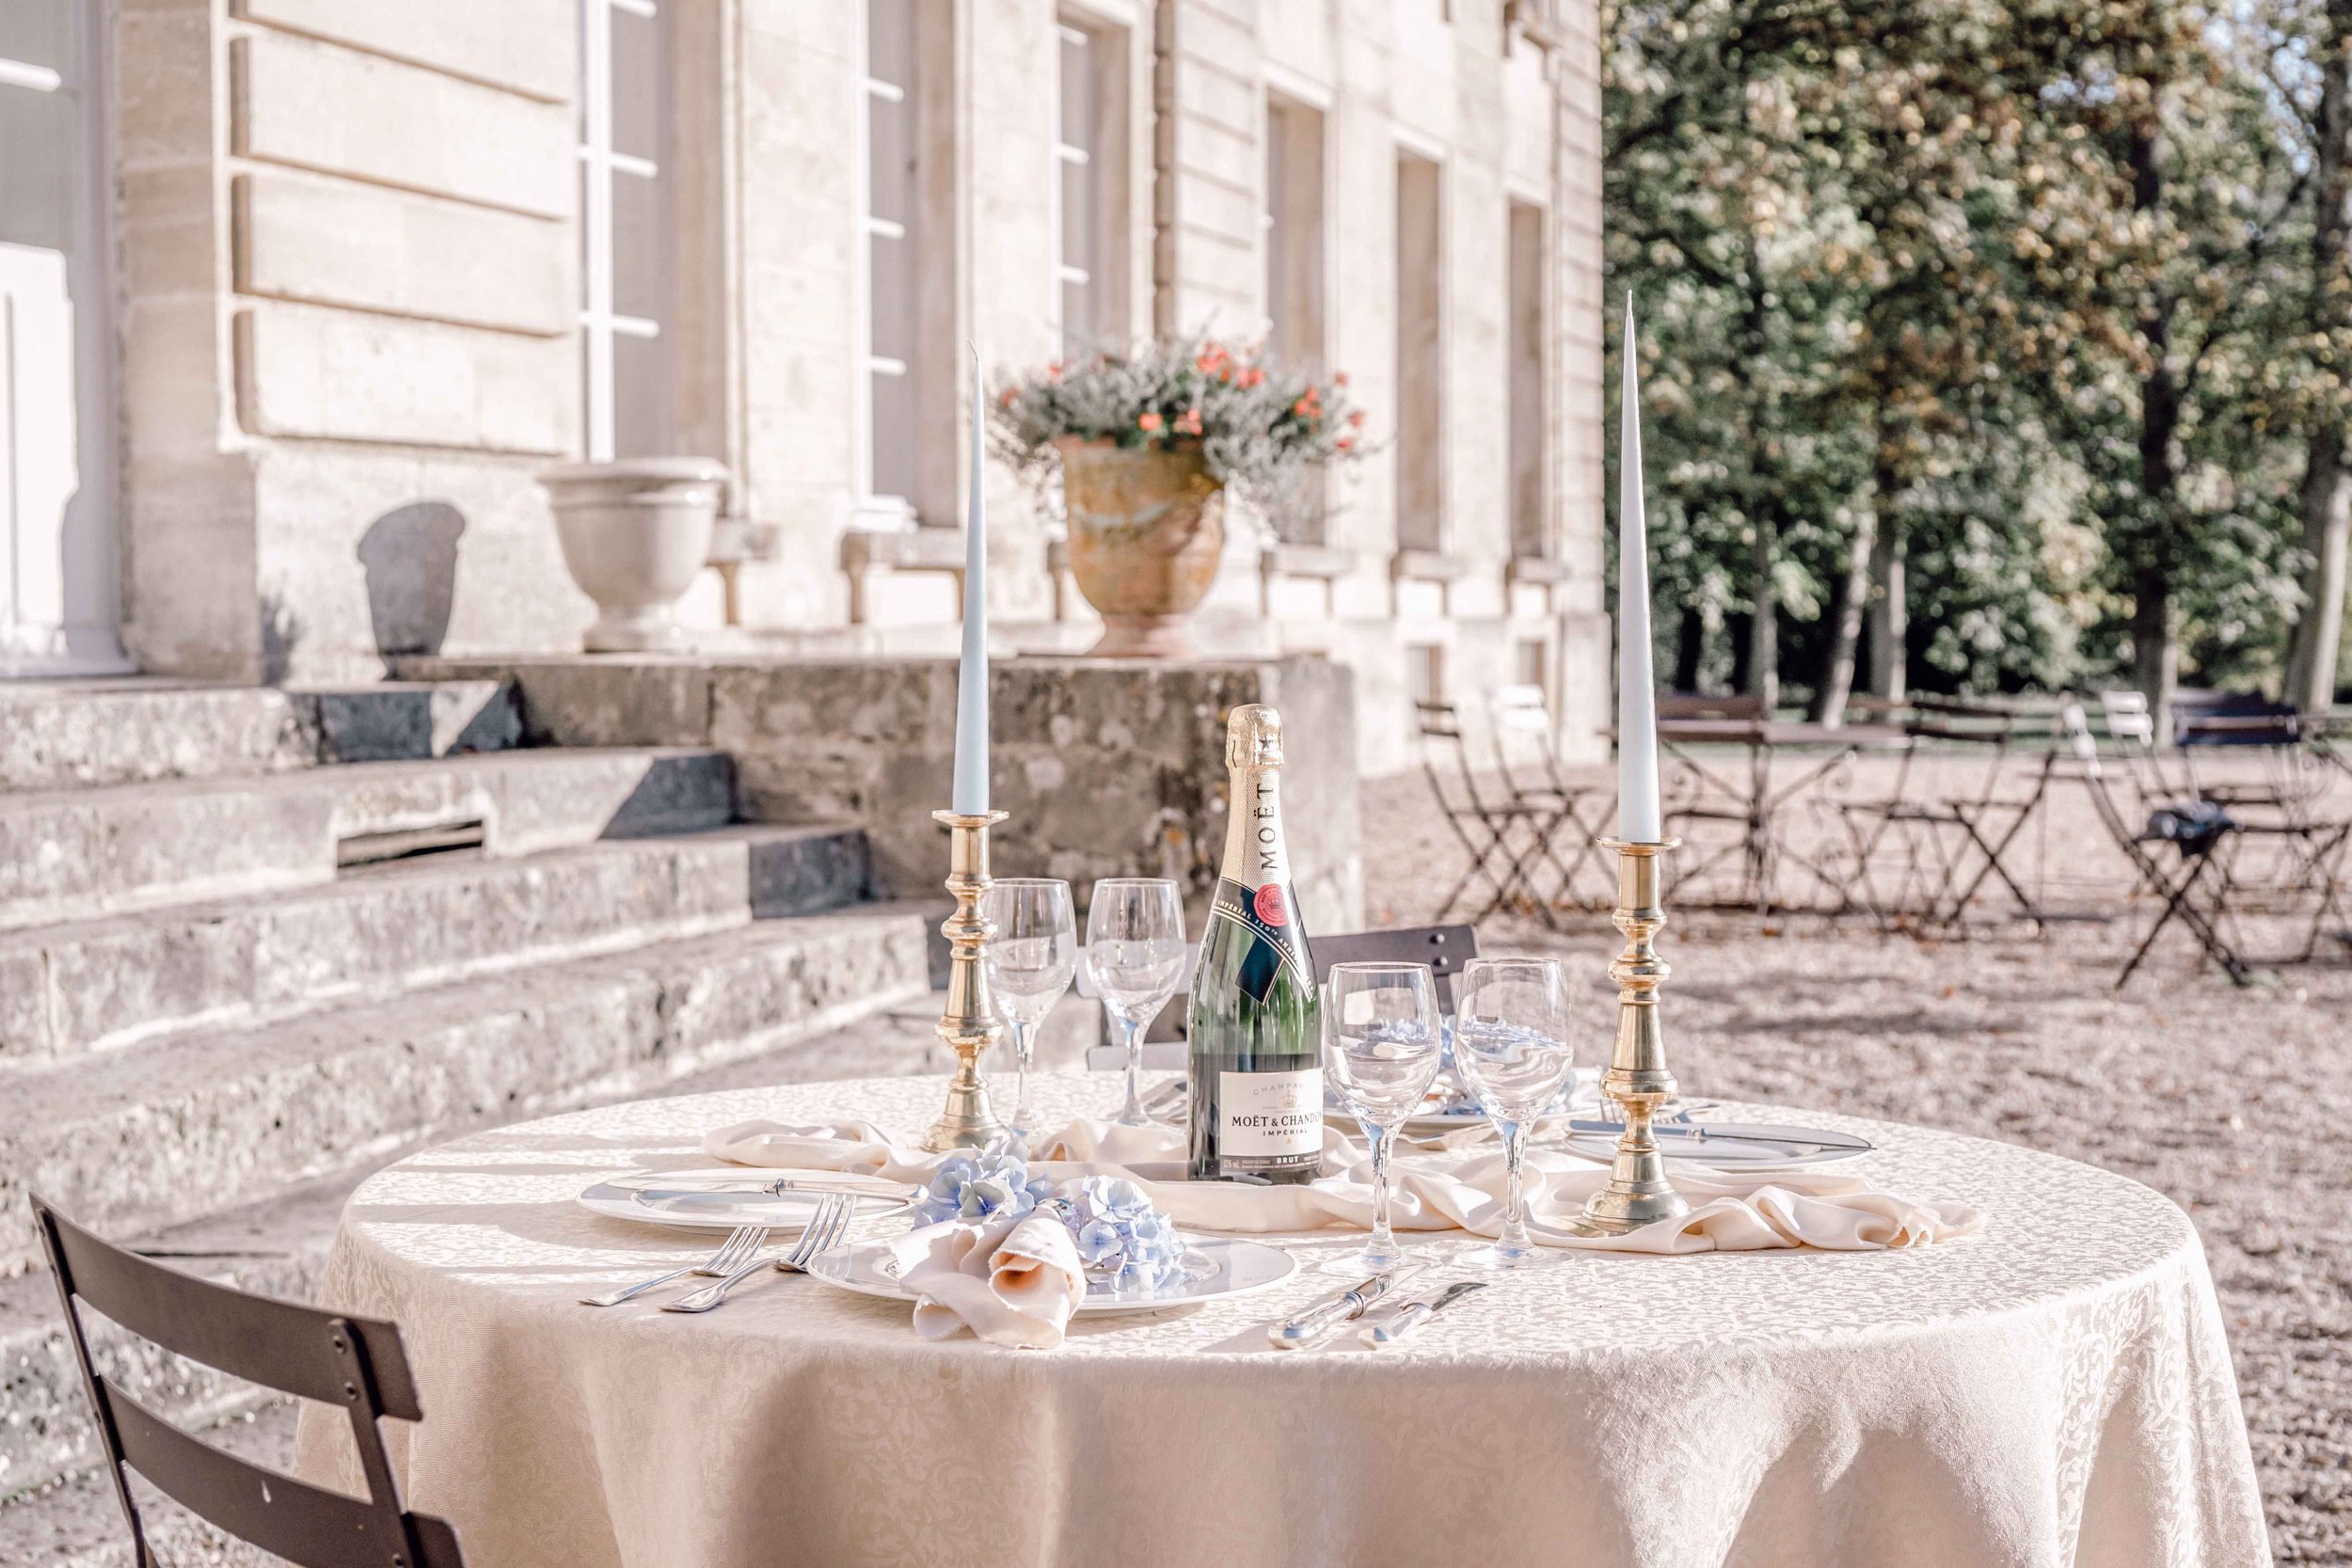 An intimate, alfresco dining table, set with candles,  decorated with pastel flowers waits for lovers  in front of Chateau de Courtomer, a French chateau wedding venue.